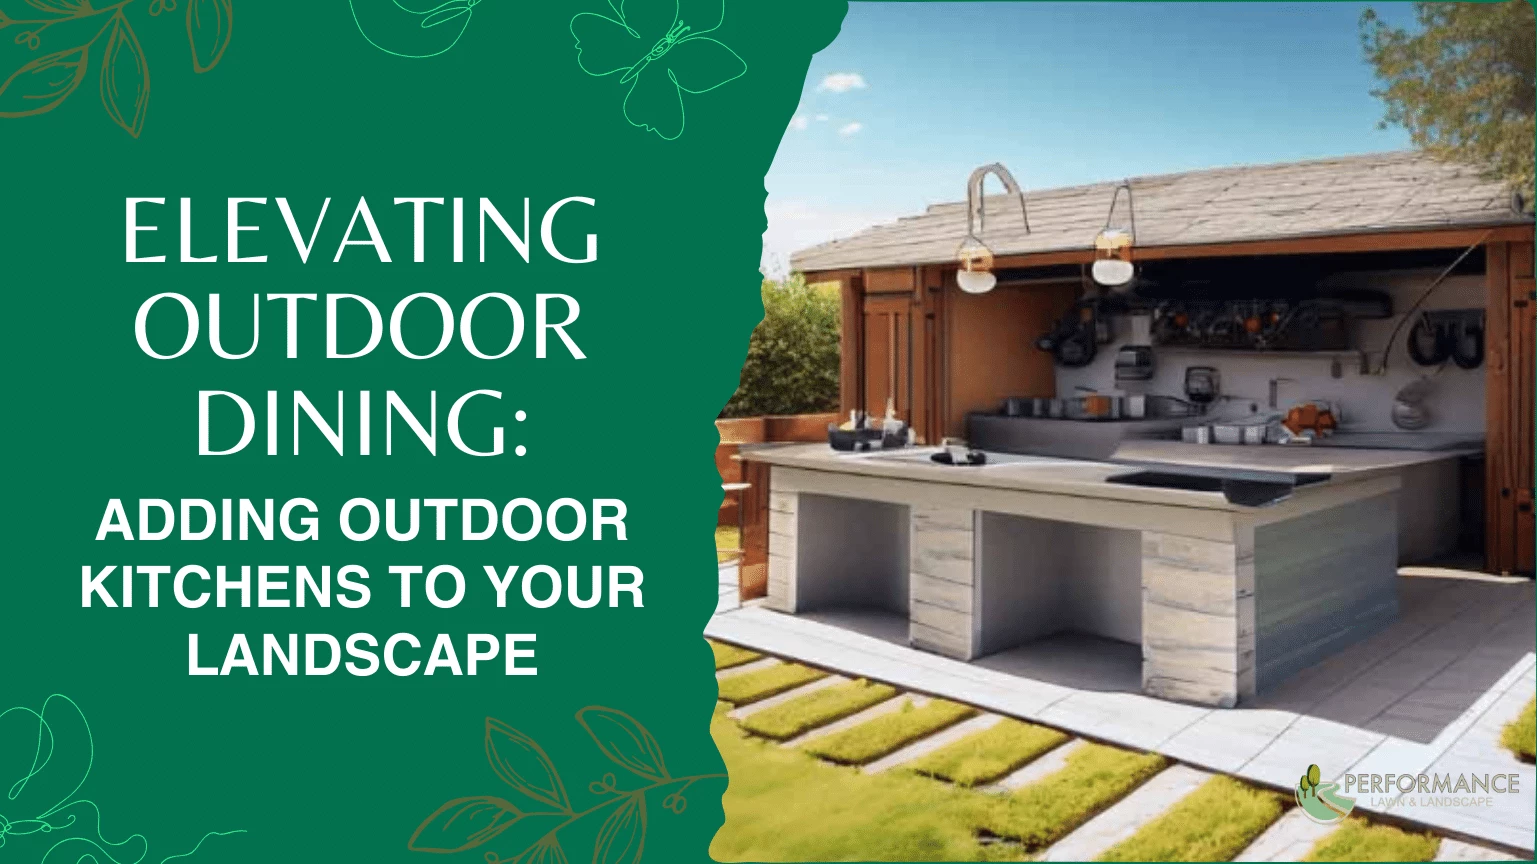 Elevating Outdoor Dining Adding Outdoor Kitchens to Your Landscape